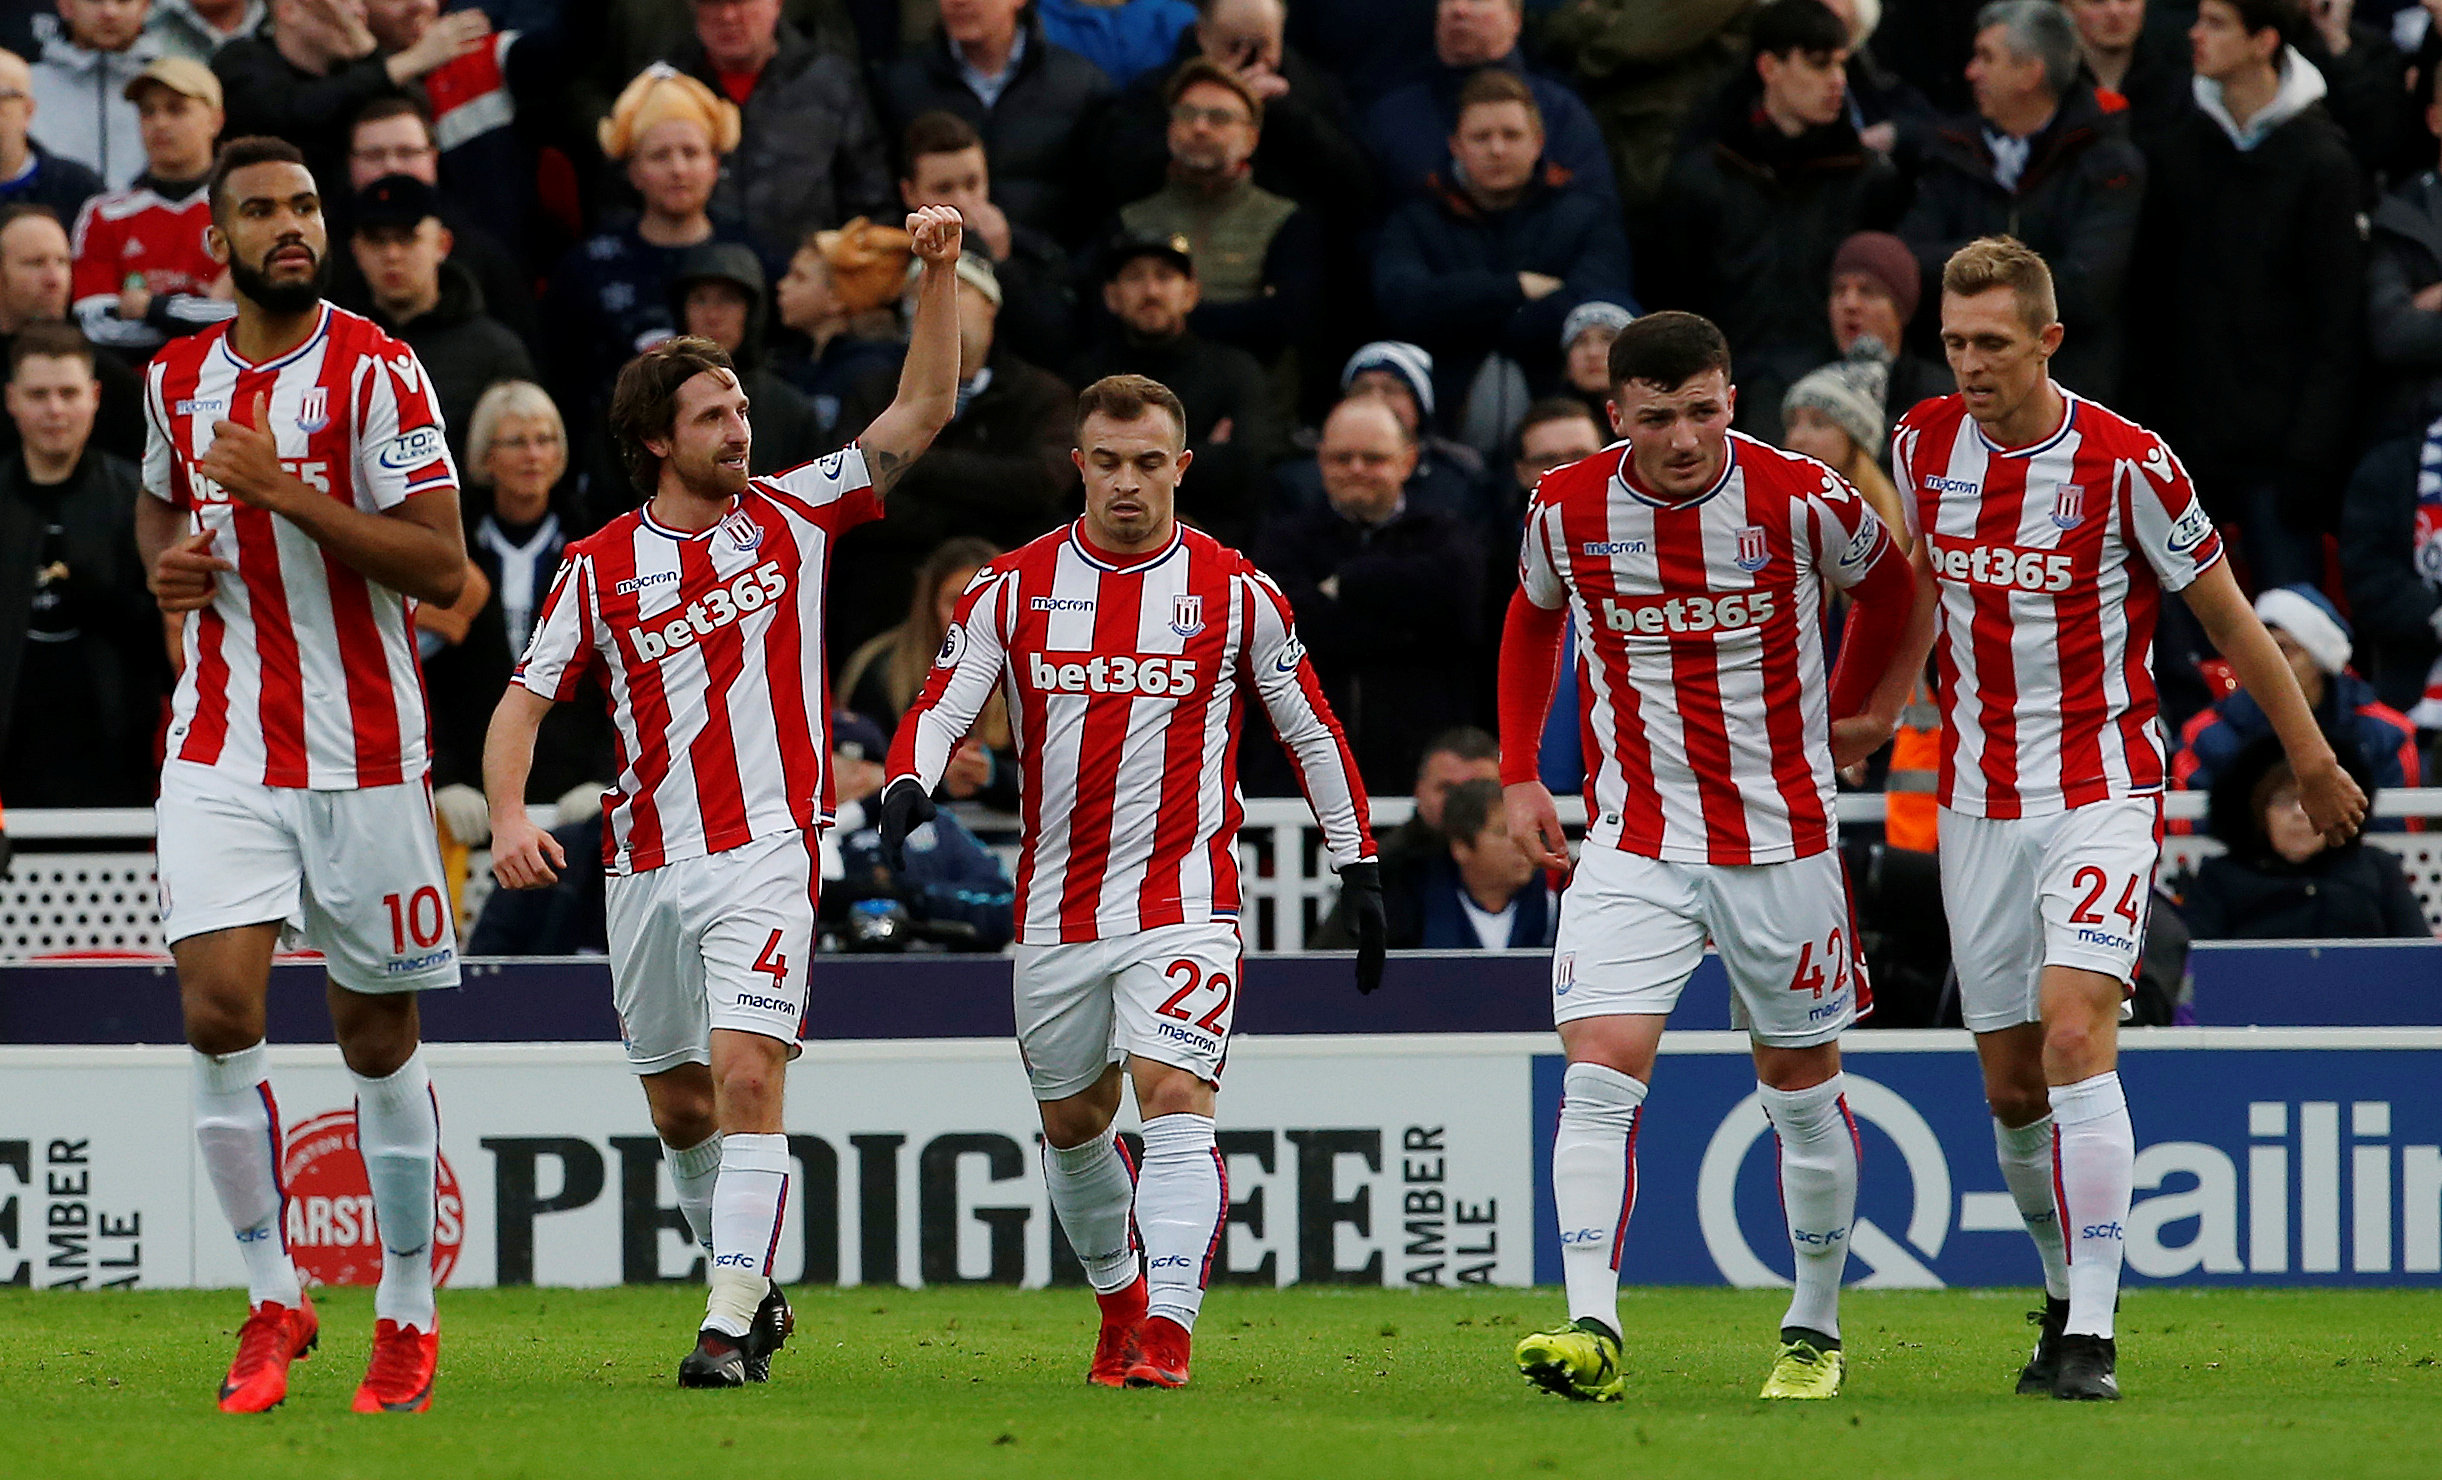 Football: Stoke victory eases pressure on manager Hughes